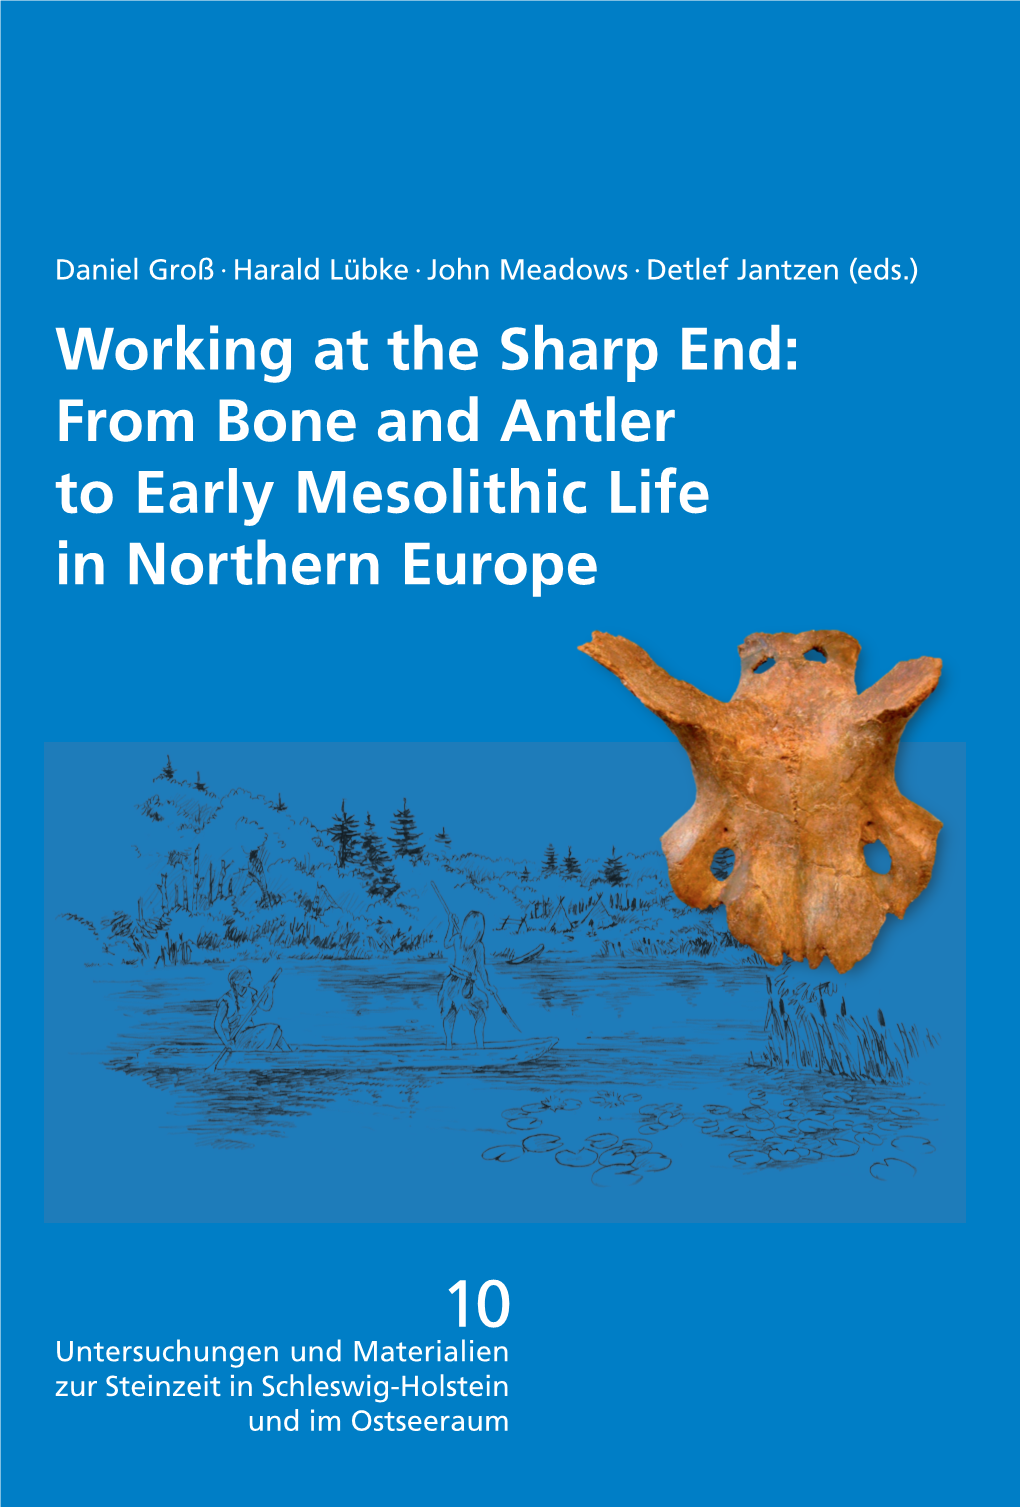 Working at the Sharp End: from Bone and Antler to Early Mesolithic Life In